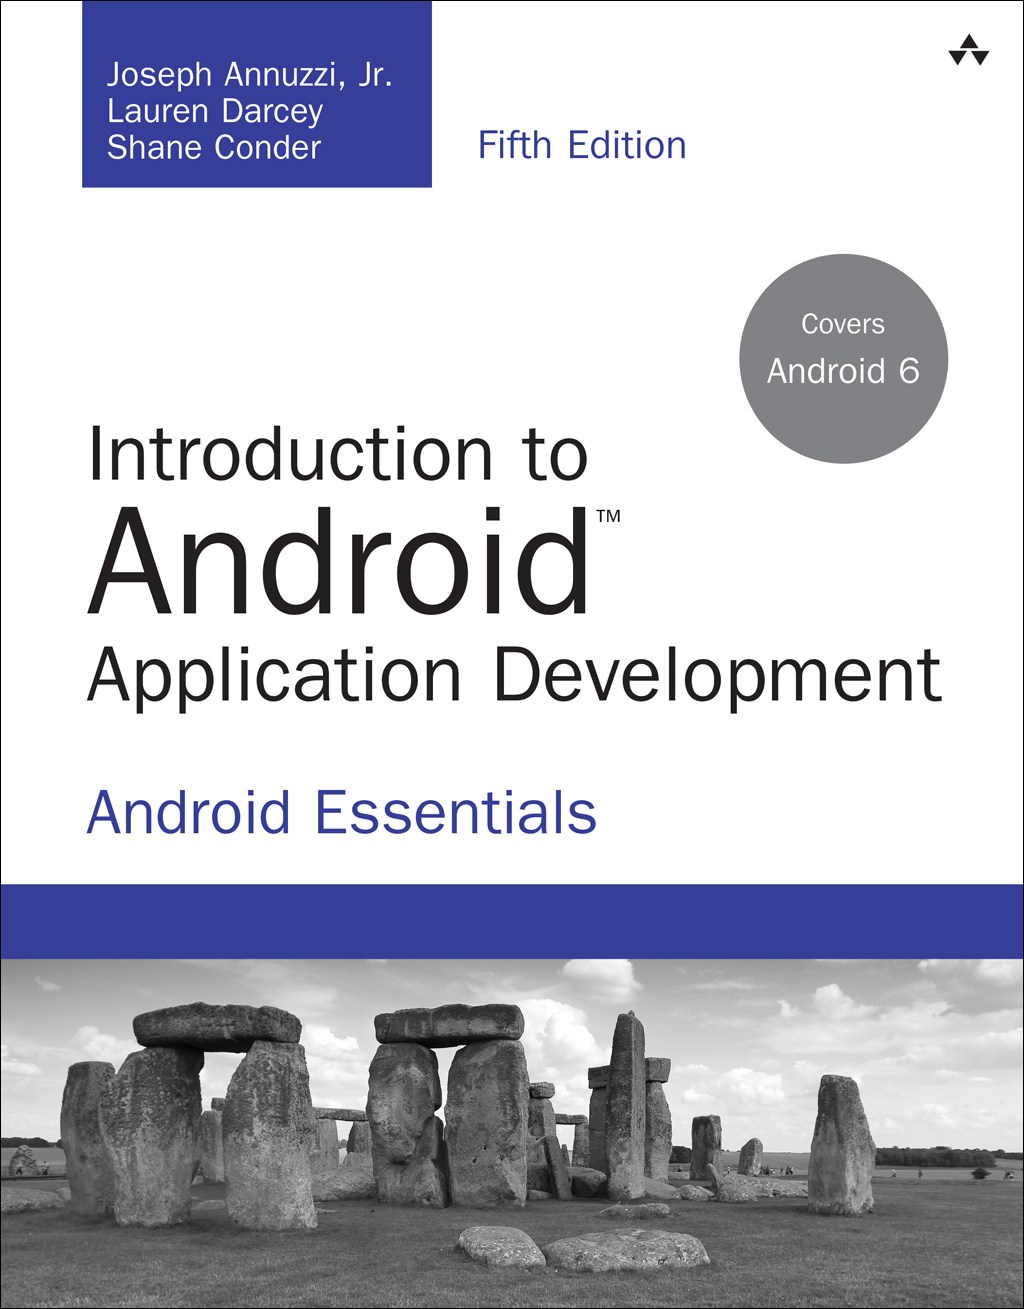 Introduction to Android Application Development: Android Essentials, 5th Edition